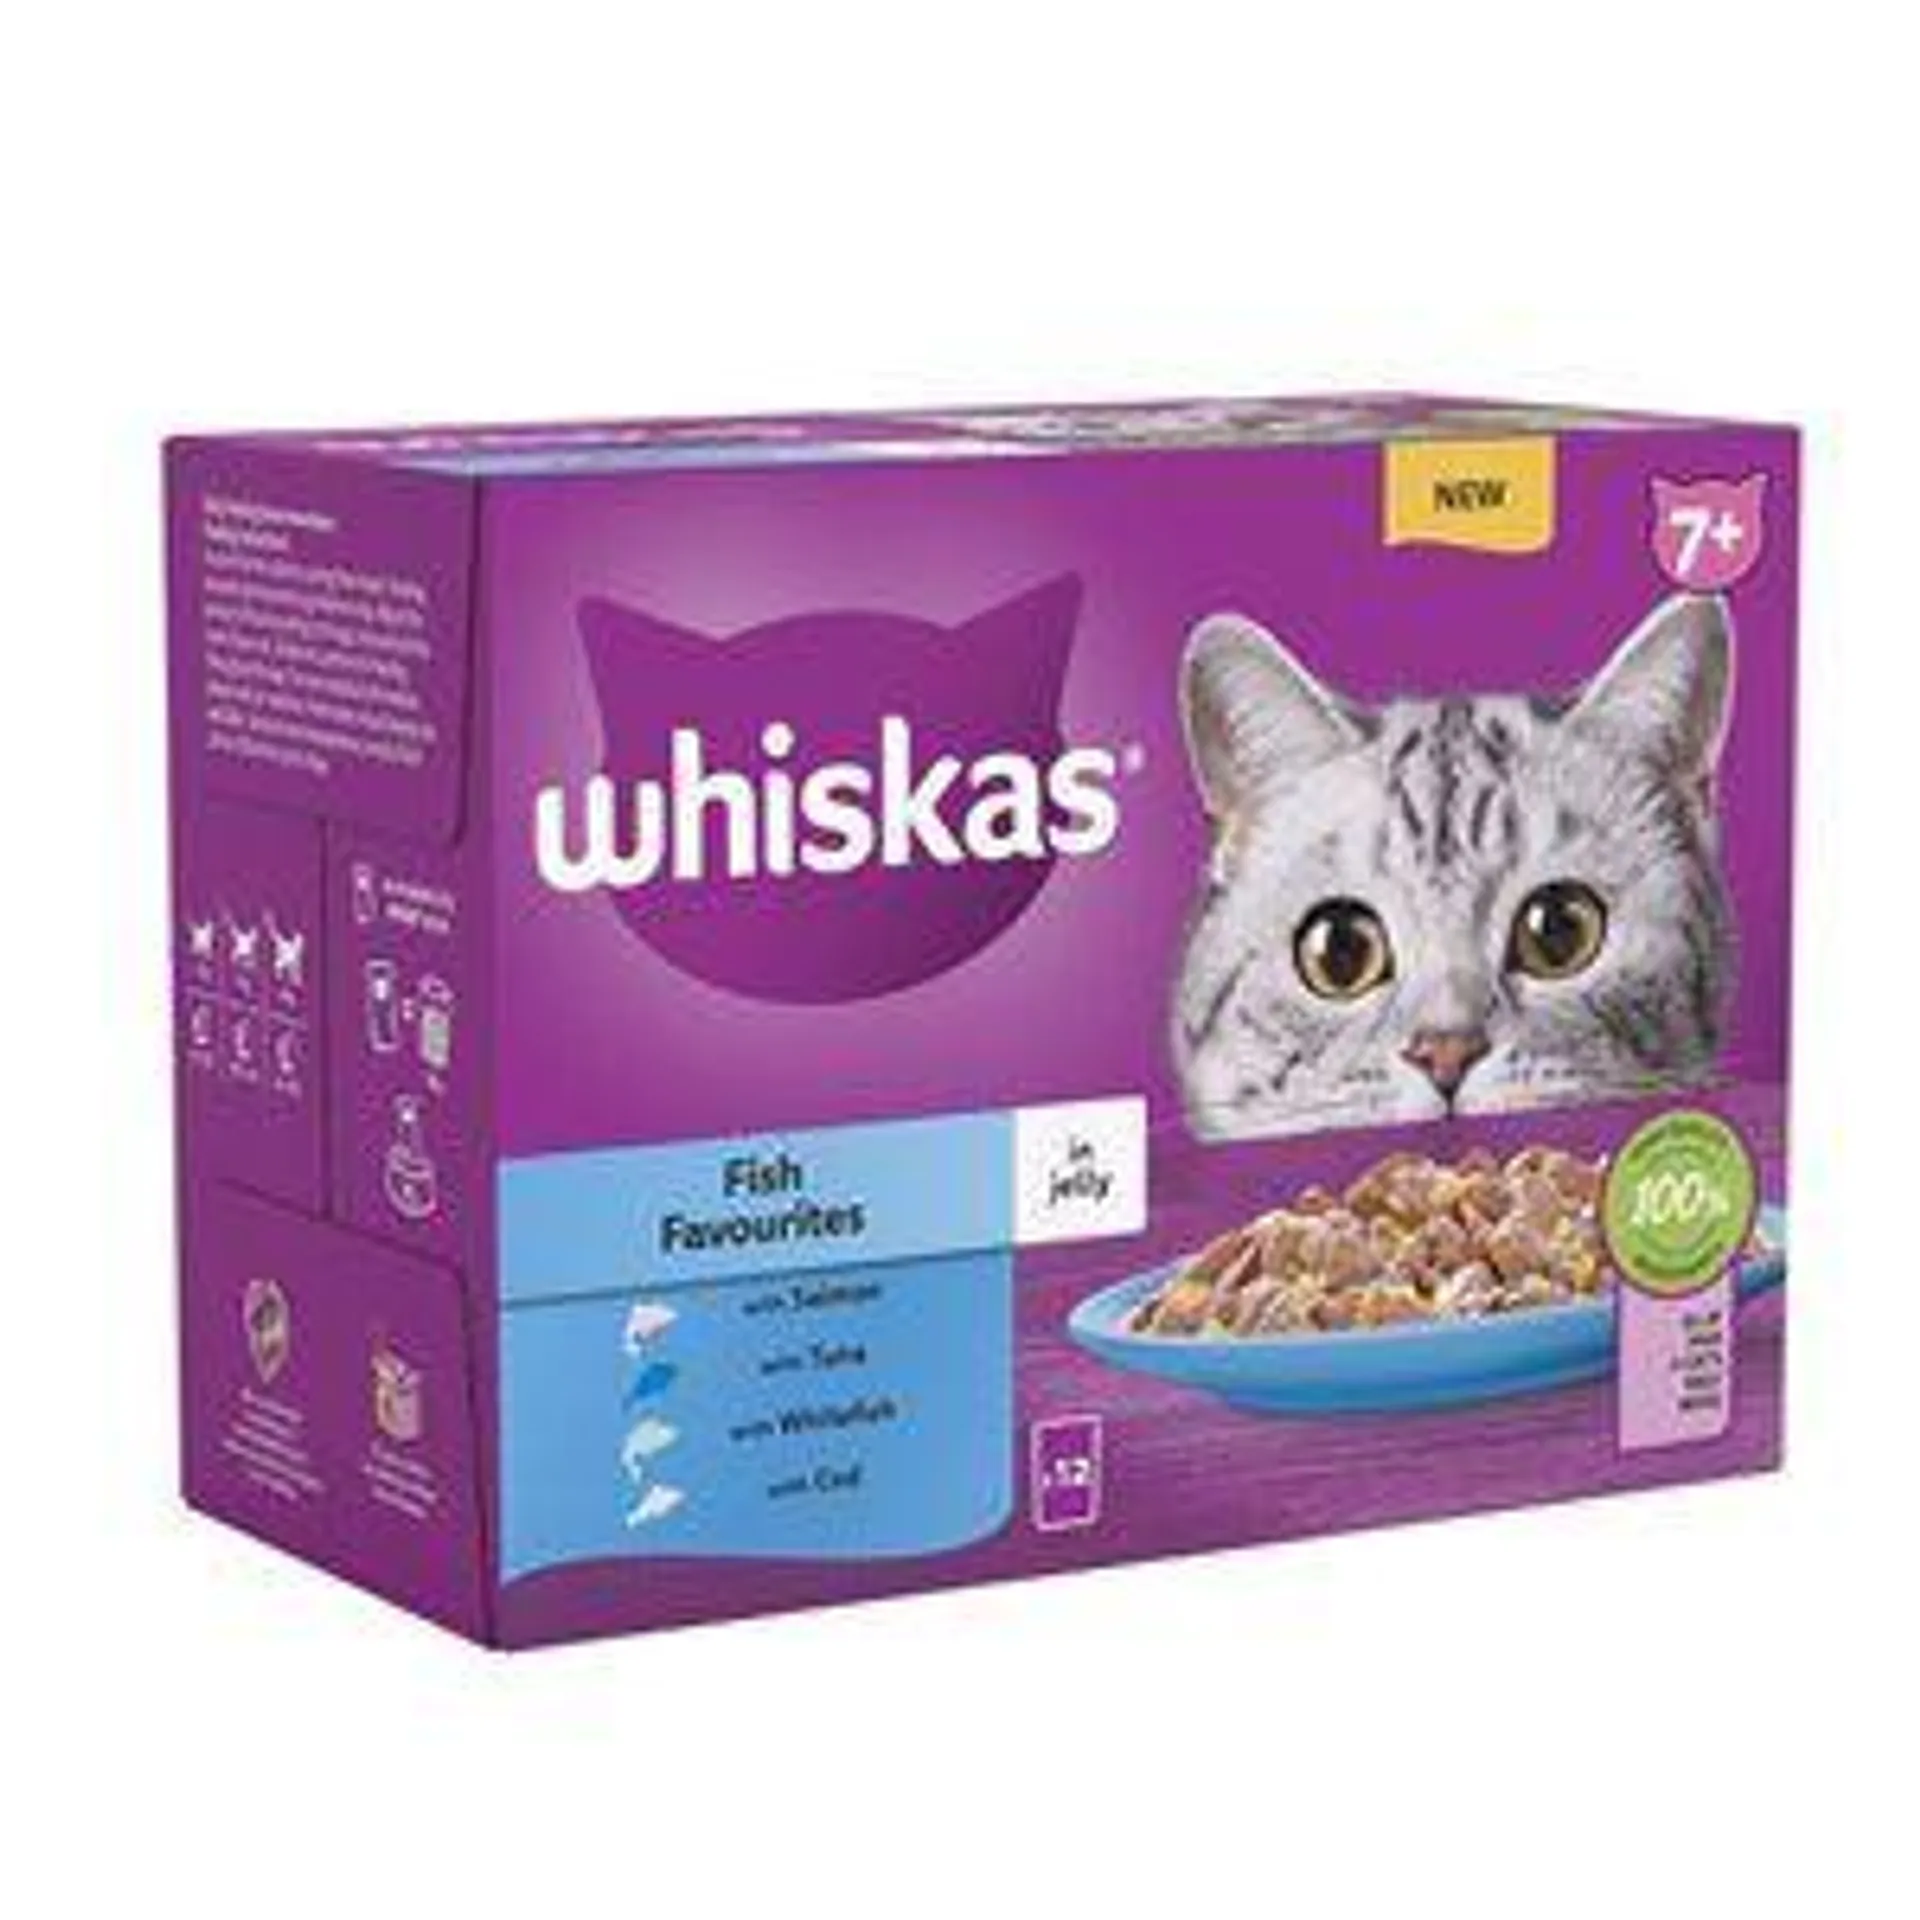 Whiskas 7+ Fish Favourites In Jelly Multipack